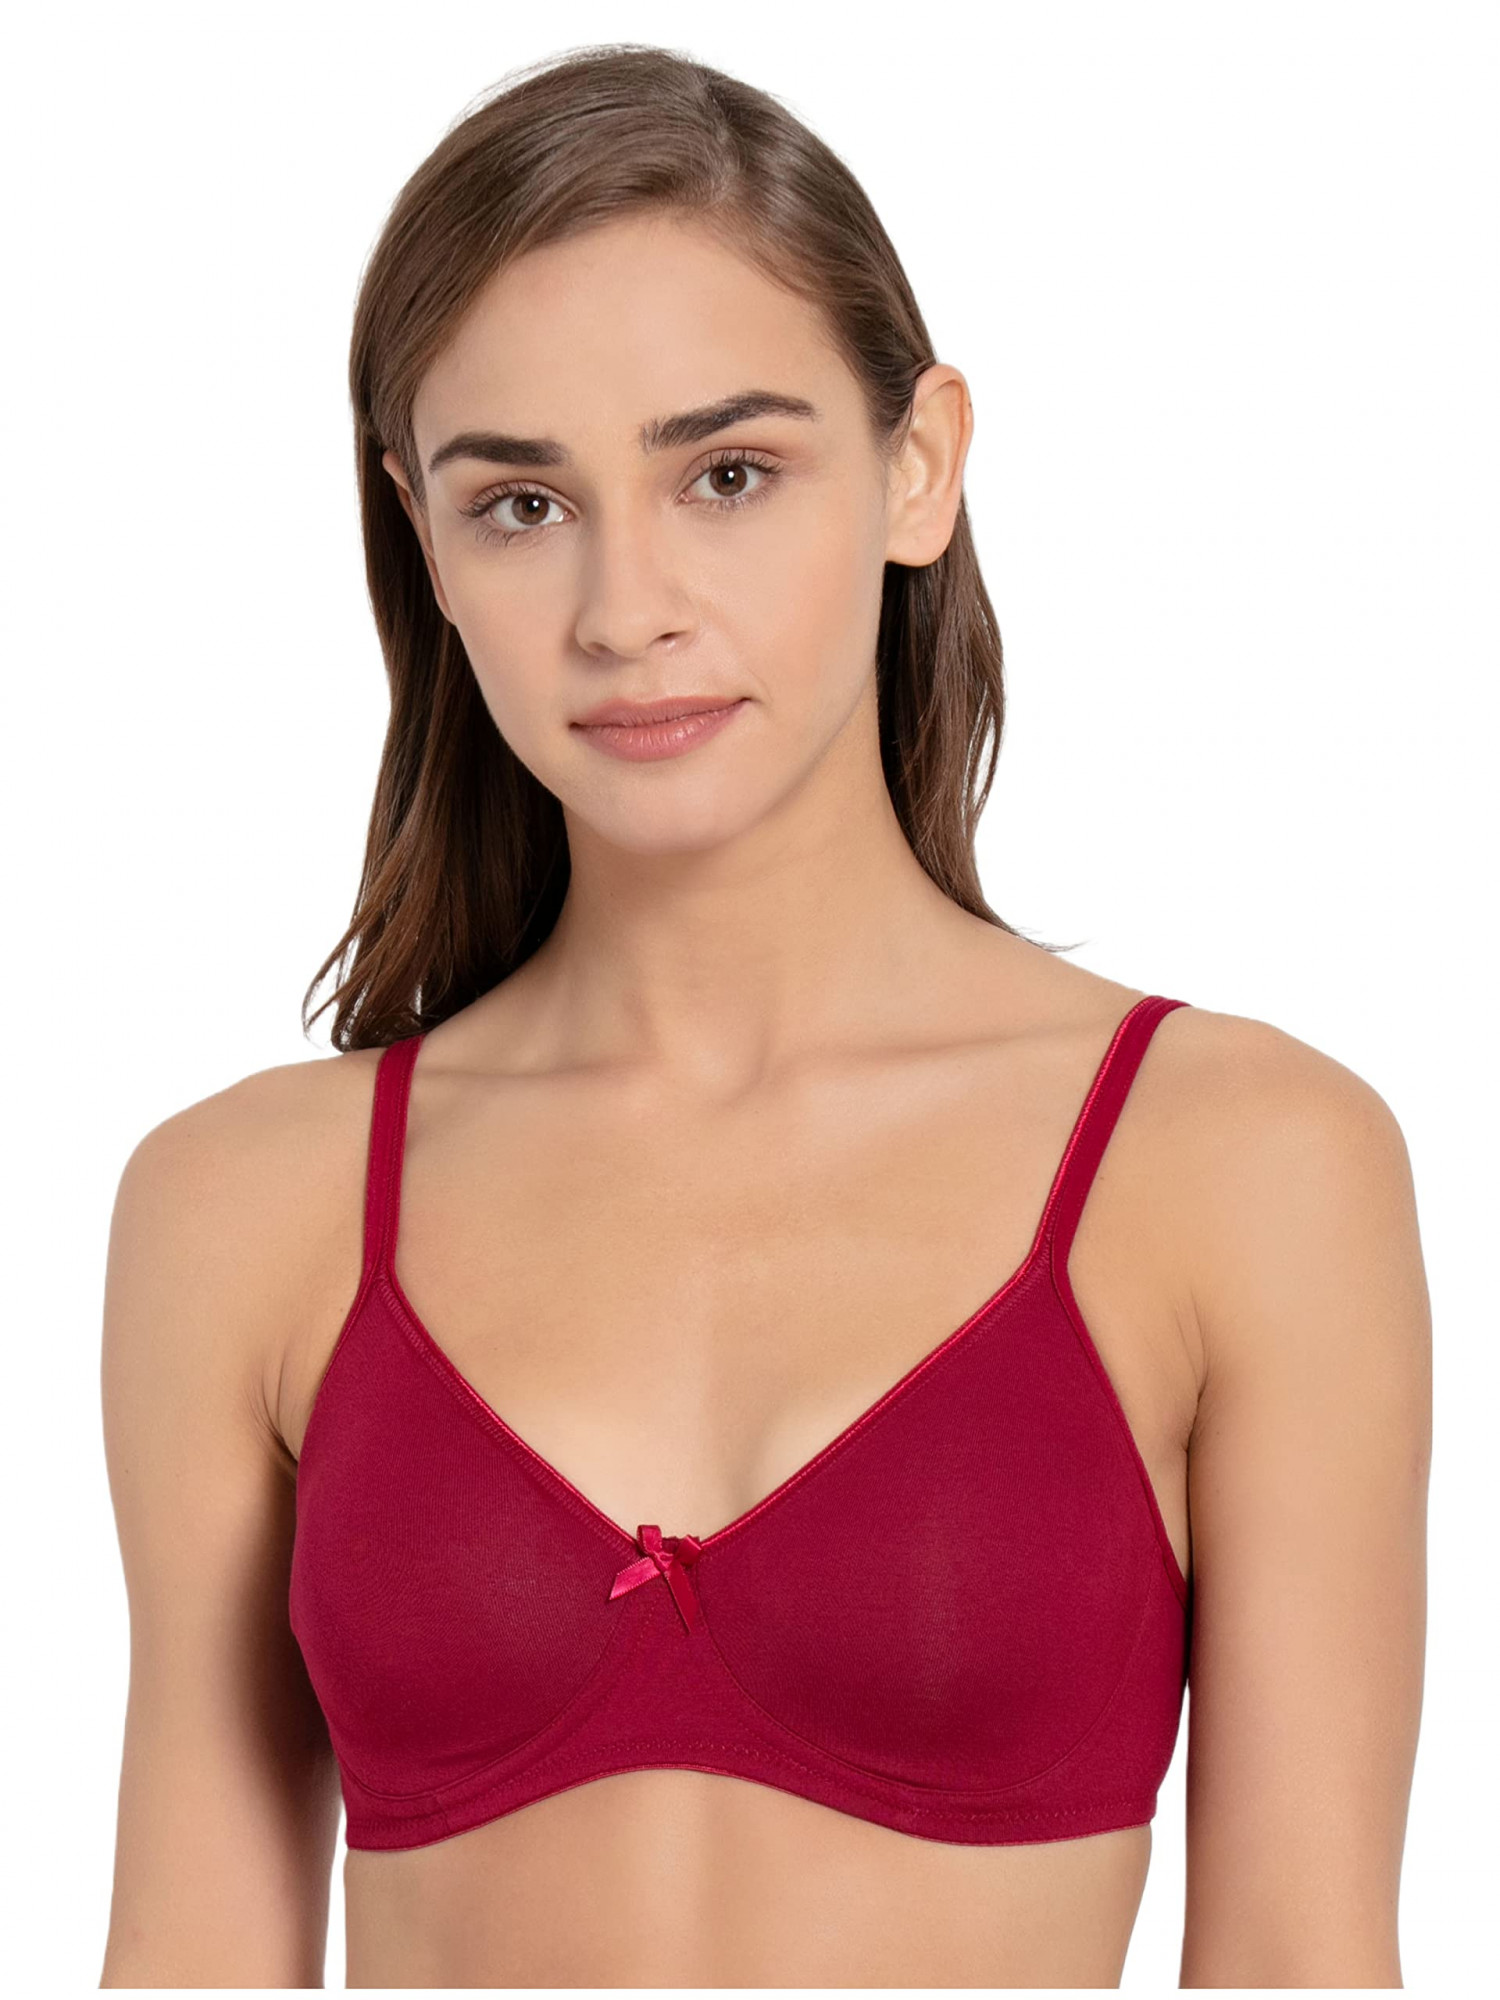 https://www.fastemi.com/uploads/fastemicom/products/jockey-1722-womenamp039s-wirefree-non-padded-super-combed-cotton-elastane-stretch-medium-coverage-everyday-bra-with-concealed-shaper-panel-and-adjustable-strapsbeet-red36bsize-36b-230496719671389_l.jpg